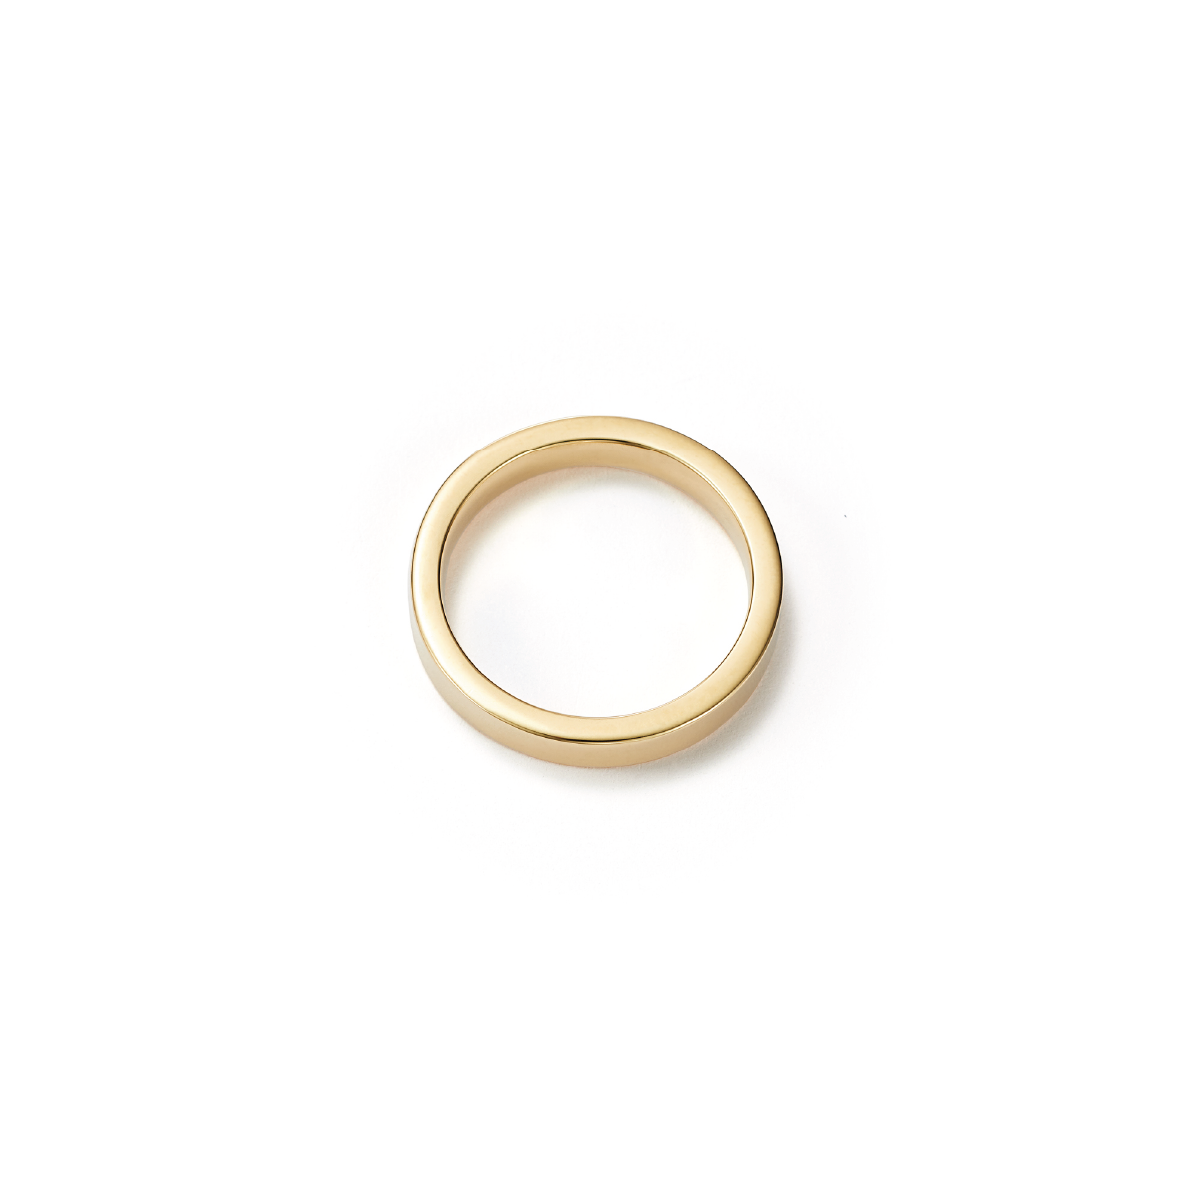 Classic Gold Wedding Band / Wedding Ring for Man or Woman - Top View